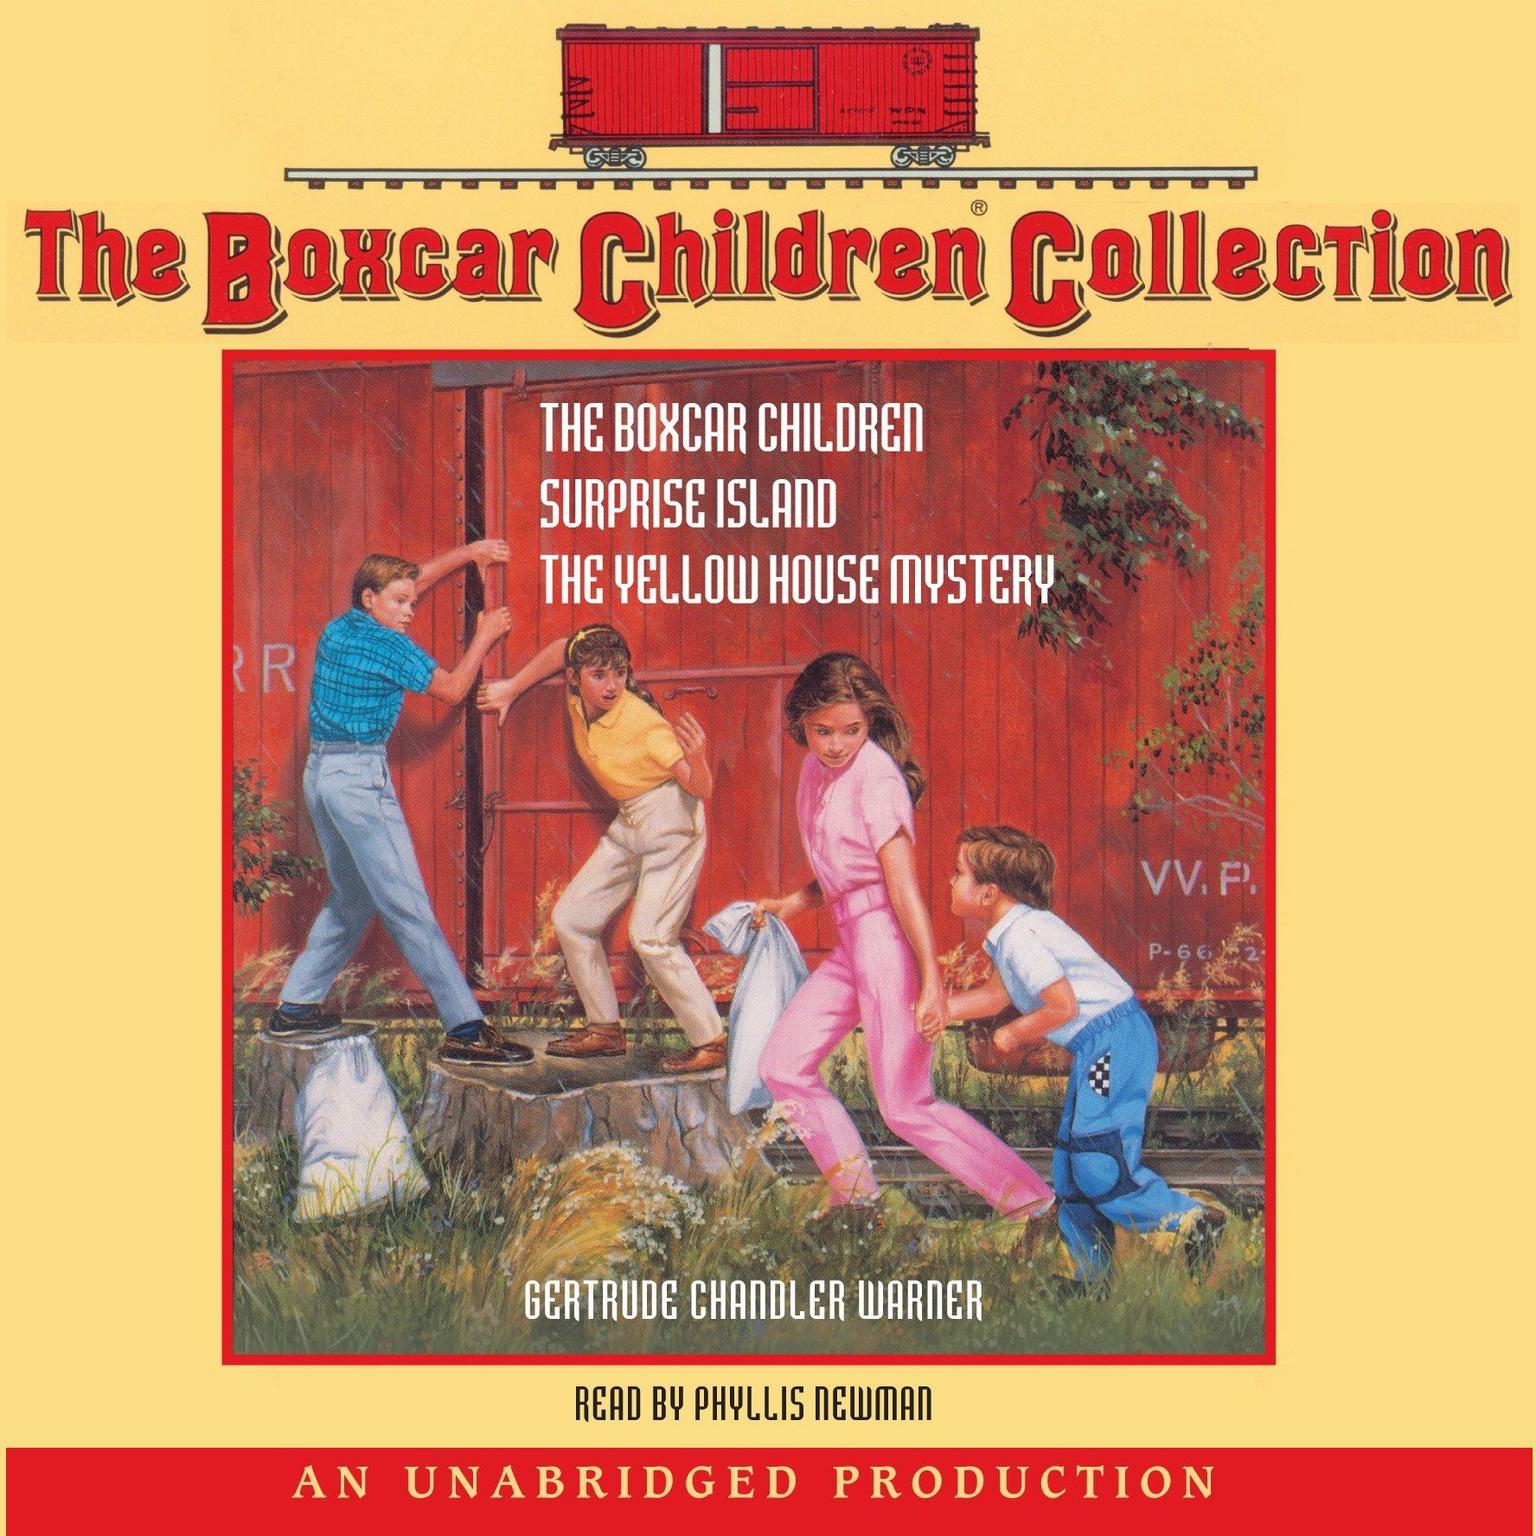 The Boxcar Children Collection: #1: The Boxcar Children; #2: Surprise Island; #3: The Yellow House Mystery Audiobook, by Gertrude Chandler Warner